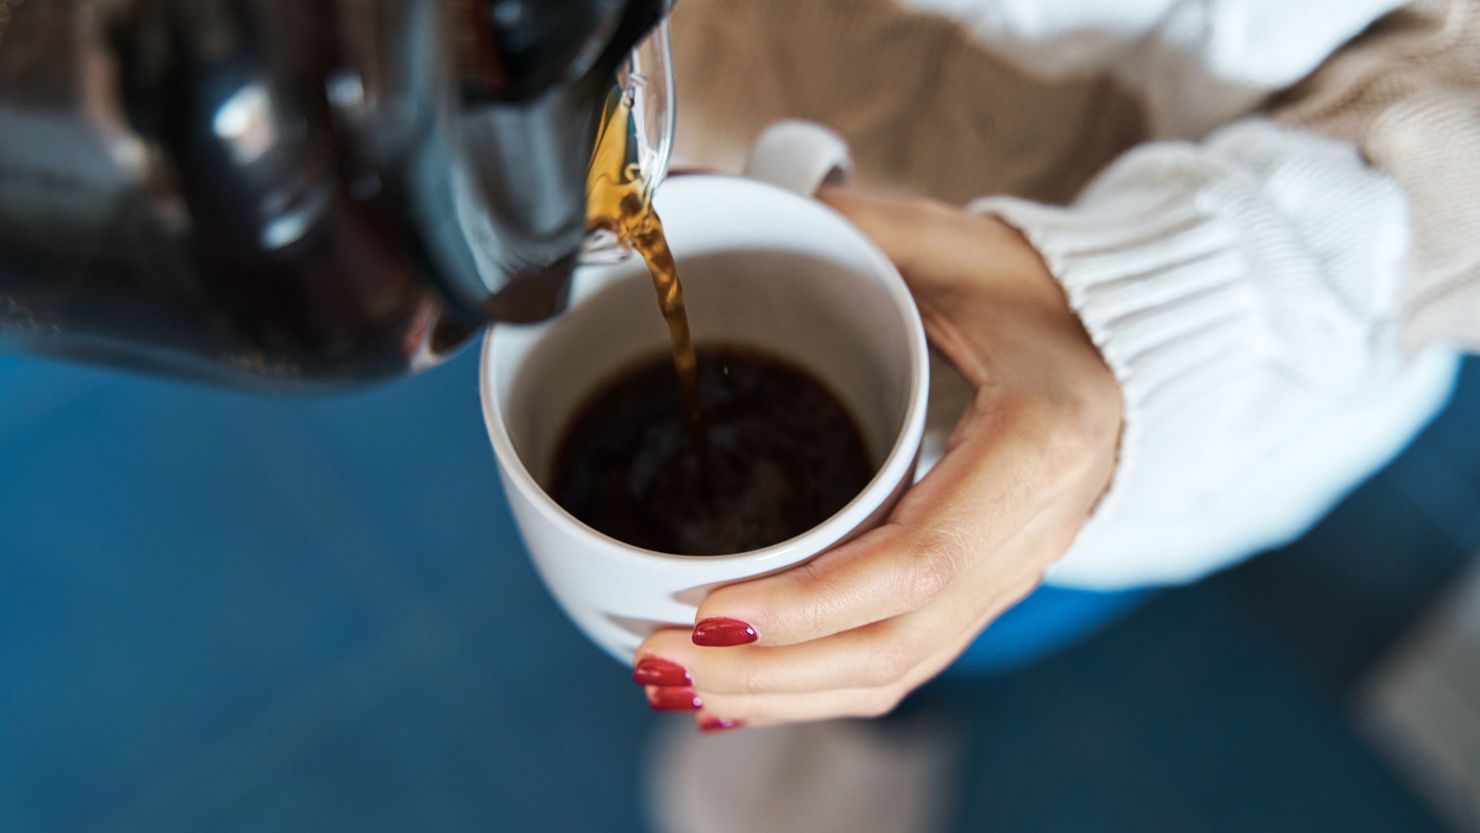 “Caffeine-containing drinks such as coffee and tea, have a lot of very positive health effects,” said science writer and author Michael Pollan.